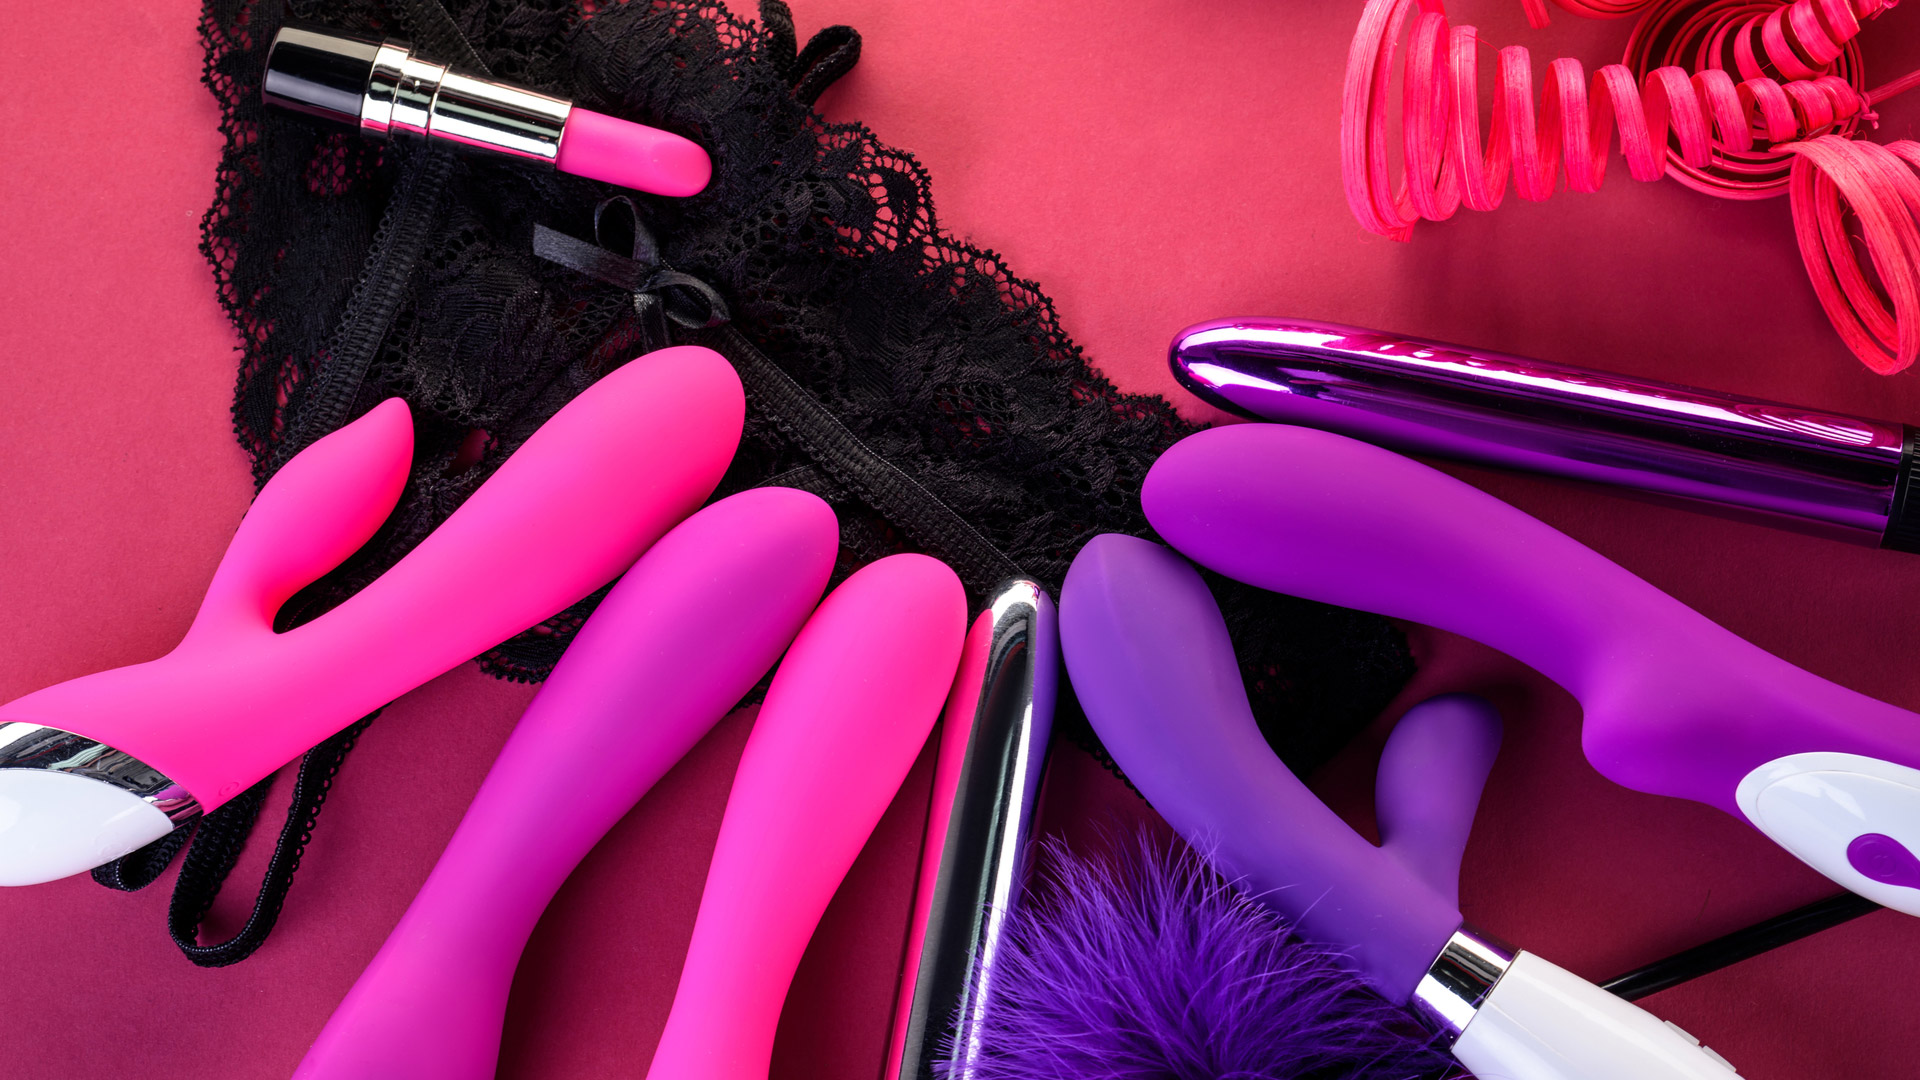 Multiple sex toys and pink lipstick lying in a circular position on black lingerie.